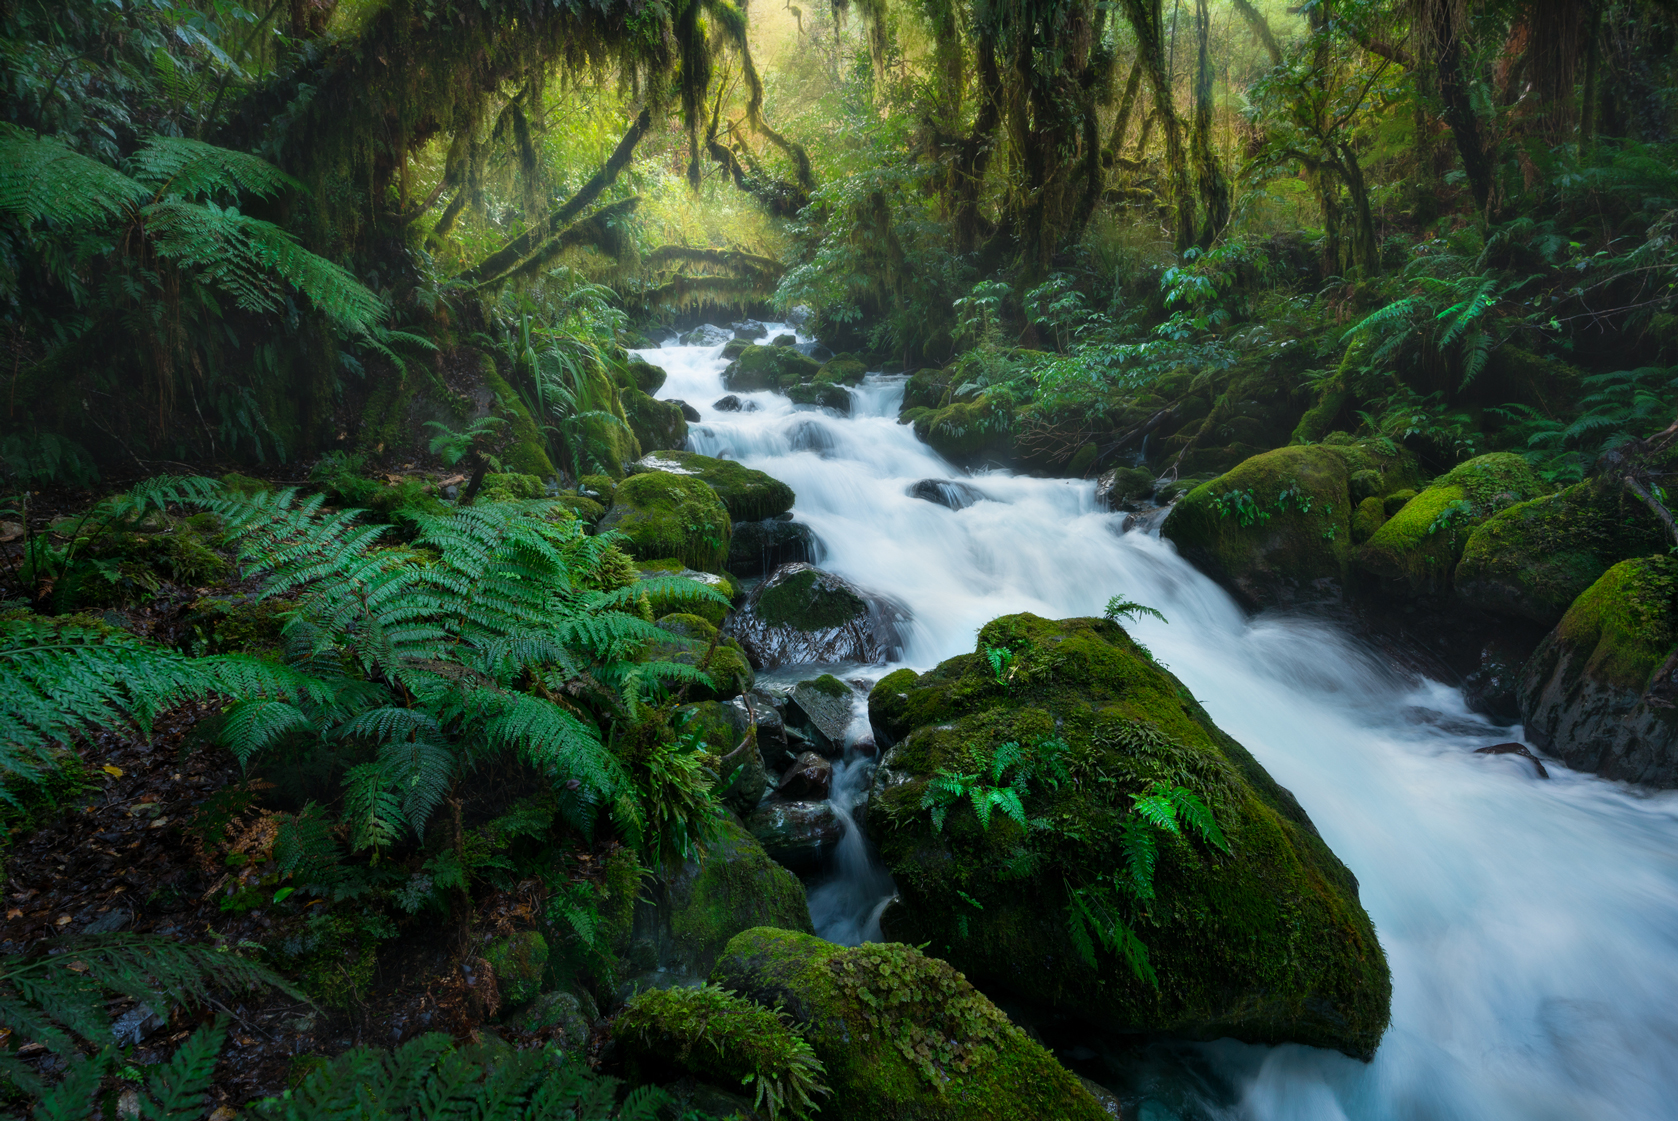 Fiordland lush green cascades and forest. Photography by William Patino.